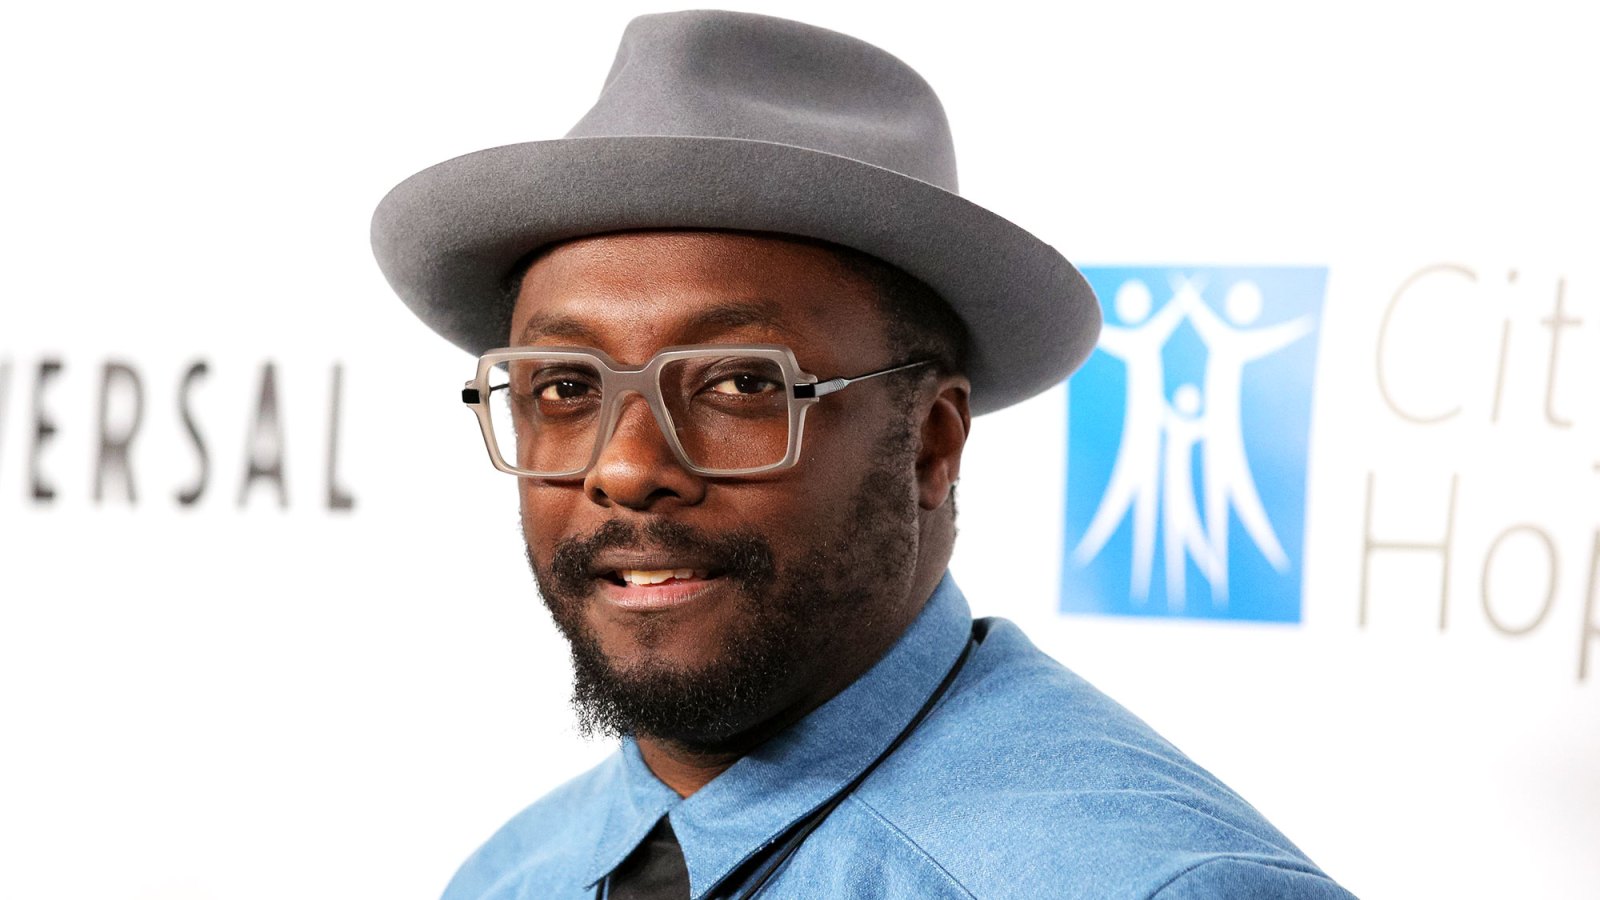 will.i.am 20 pound lb weight loss